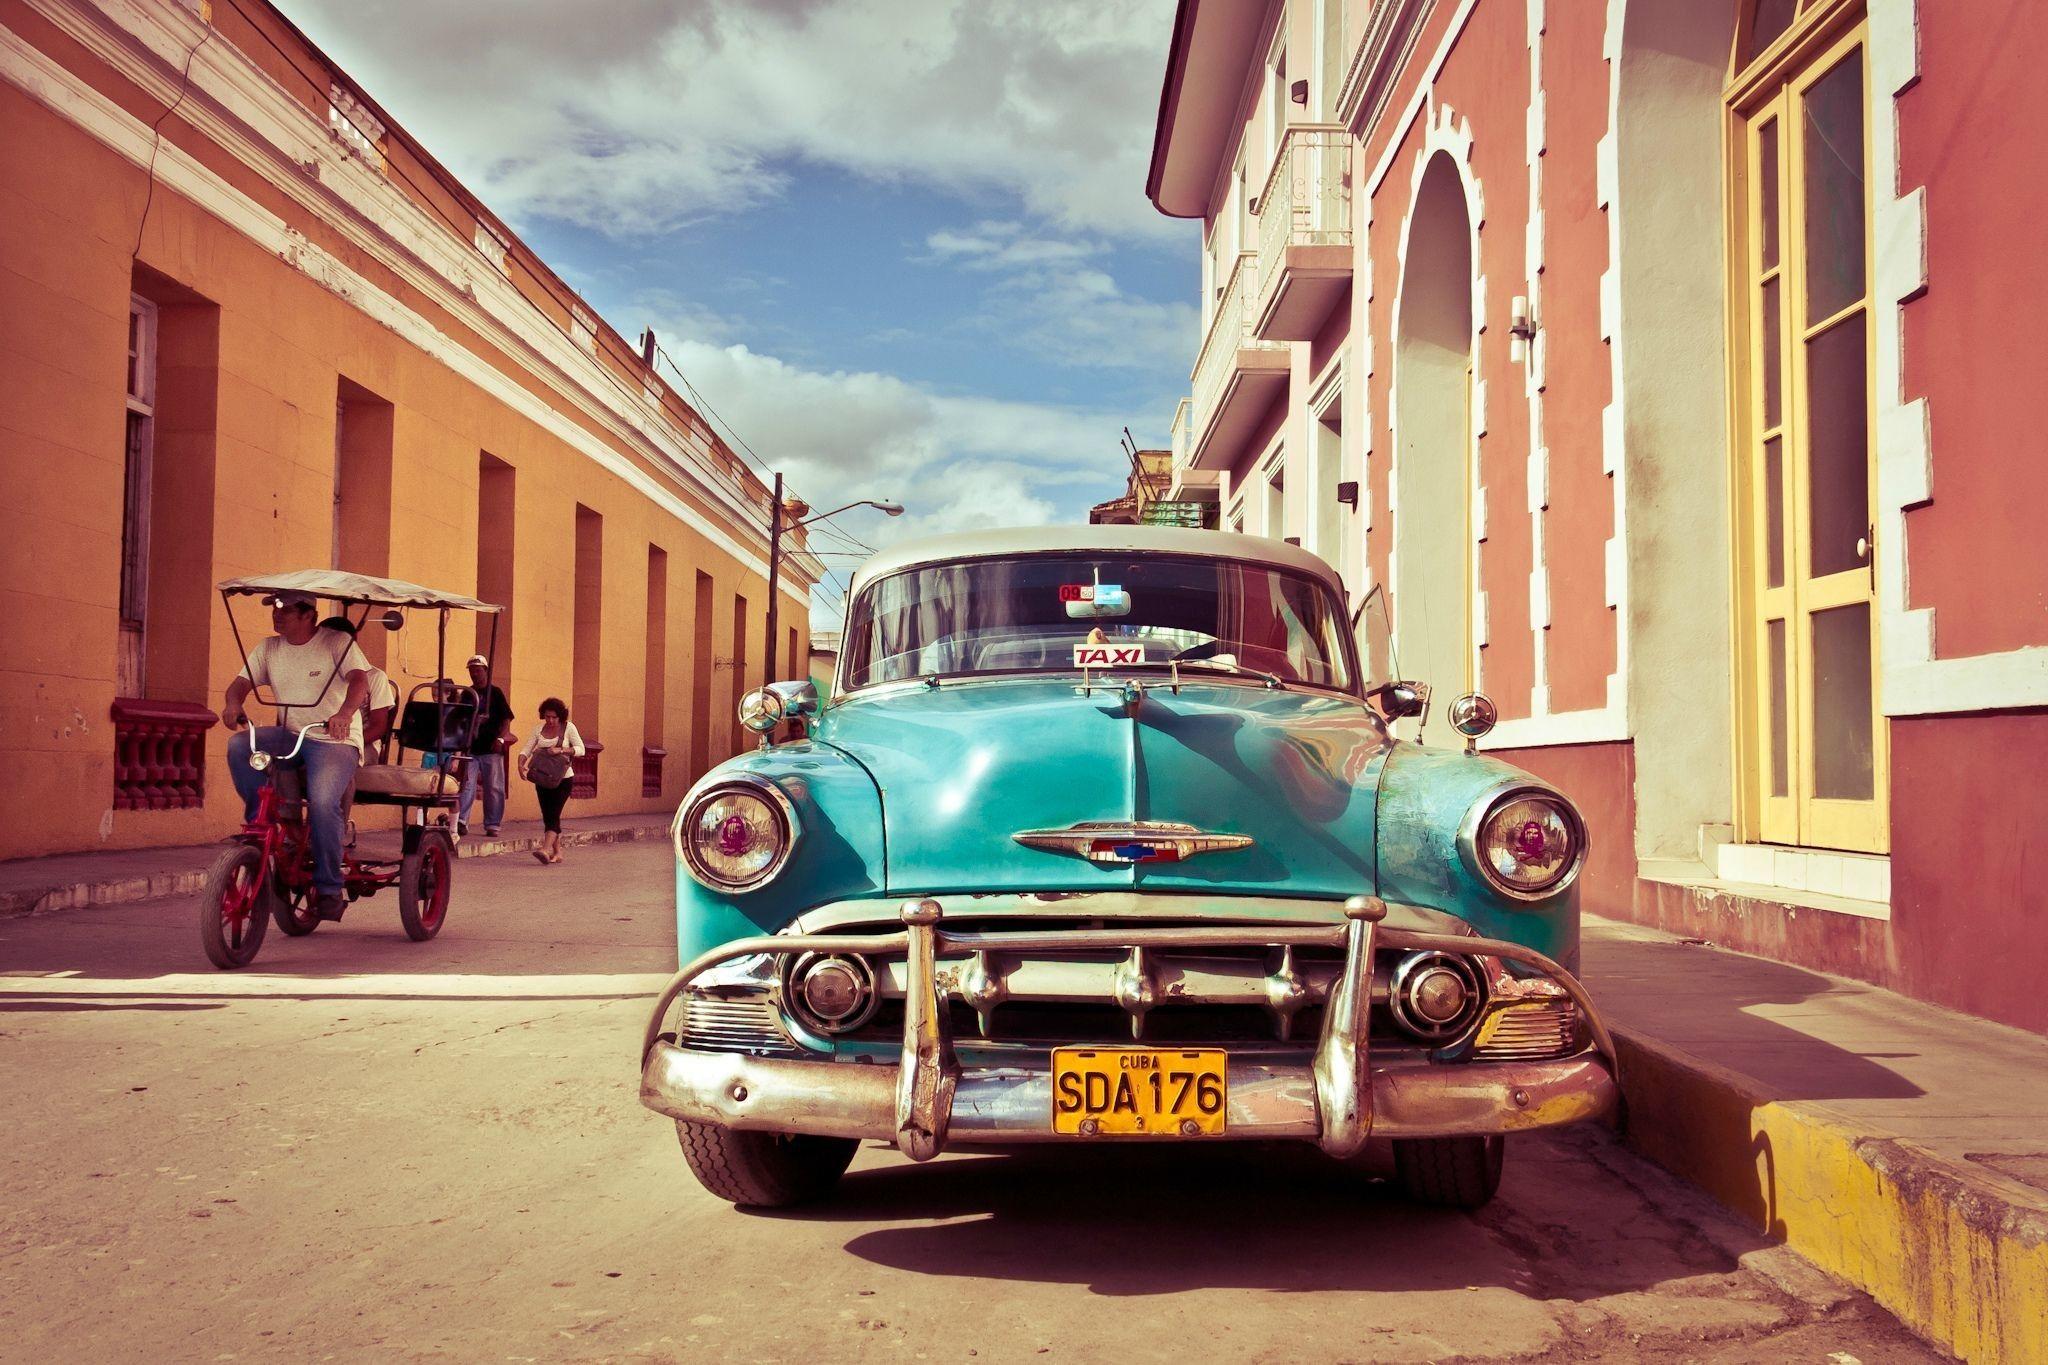 100 Beautiful Cuba Pictures  Download Free Images on Unsplash